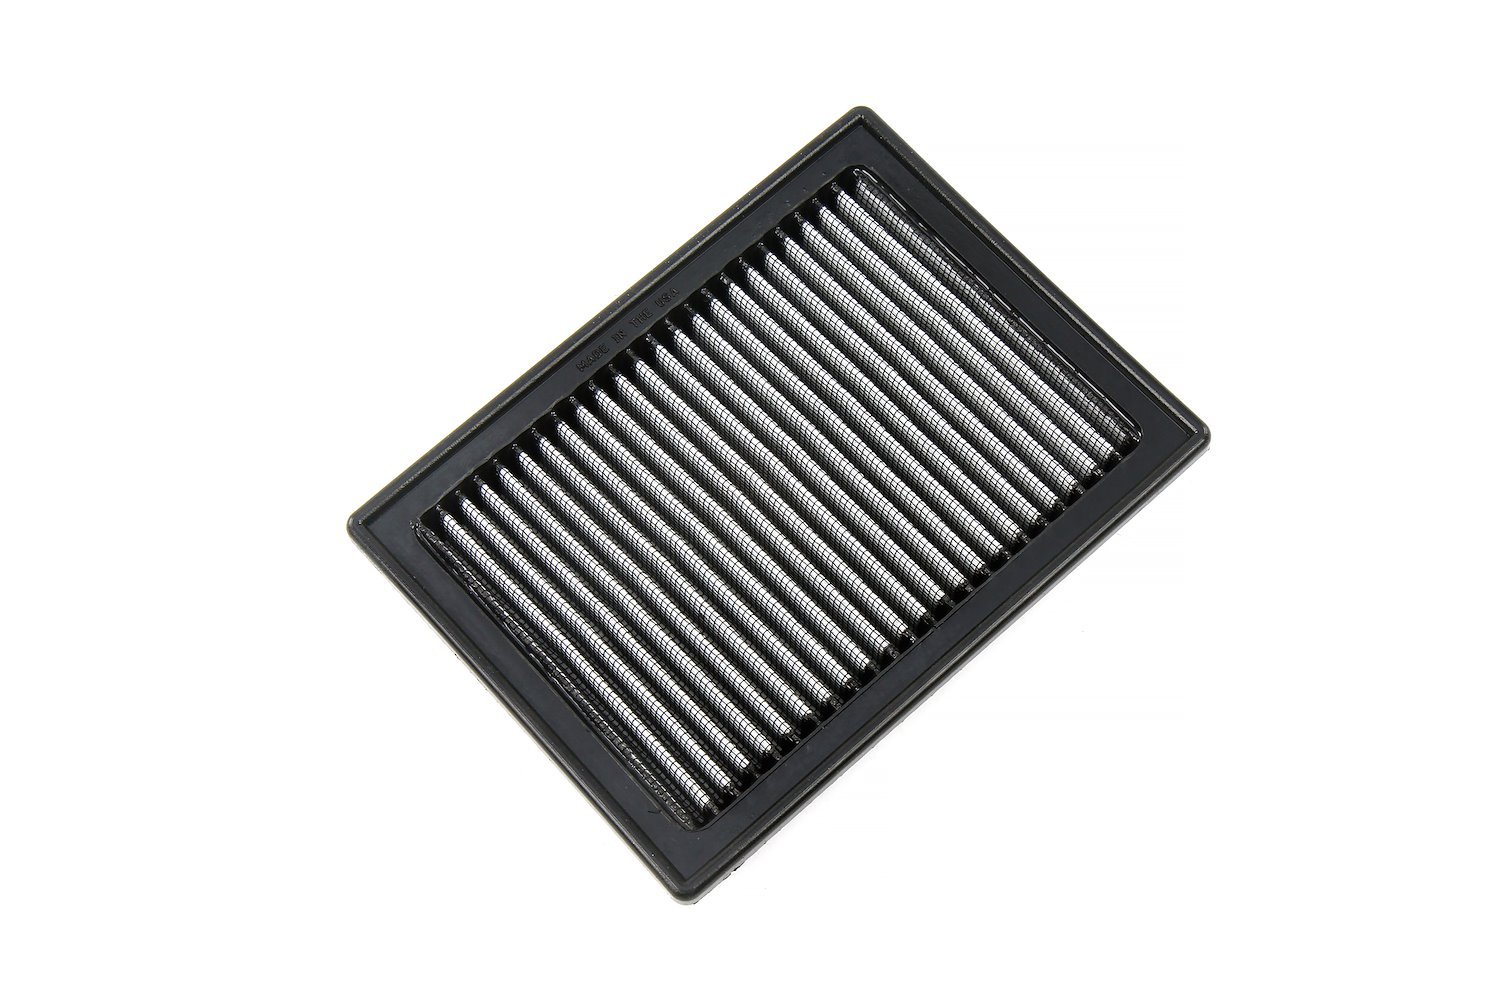 HPS-457369 Performance Drop-In Air Filter, Directly Replaces OEM Drop-In Panel Filter, Improves Performance & Fuel Economy